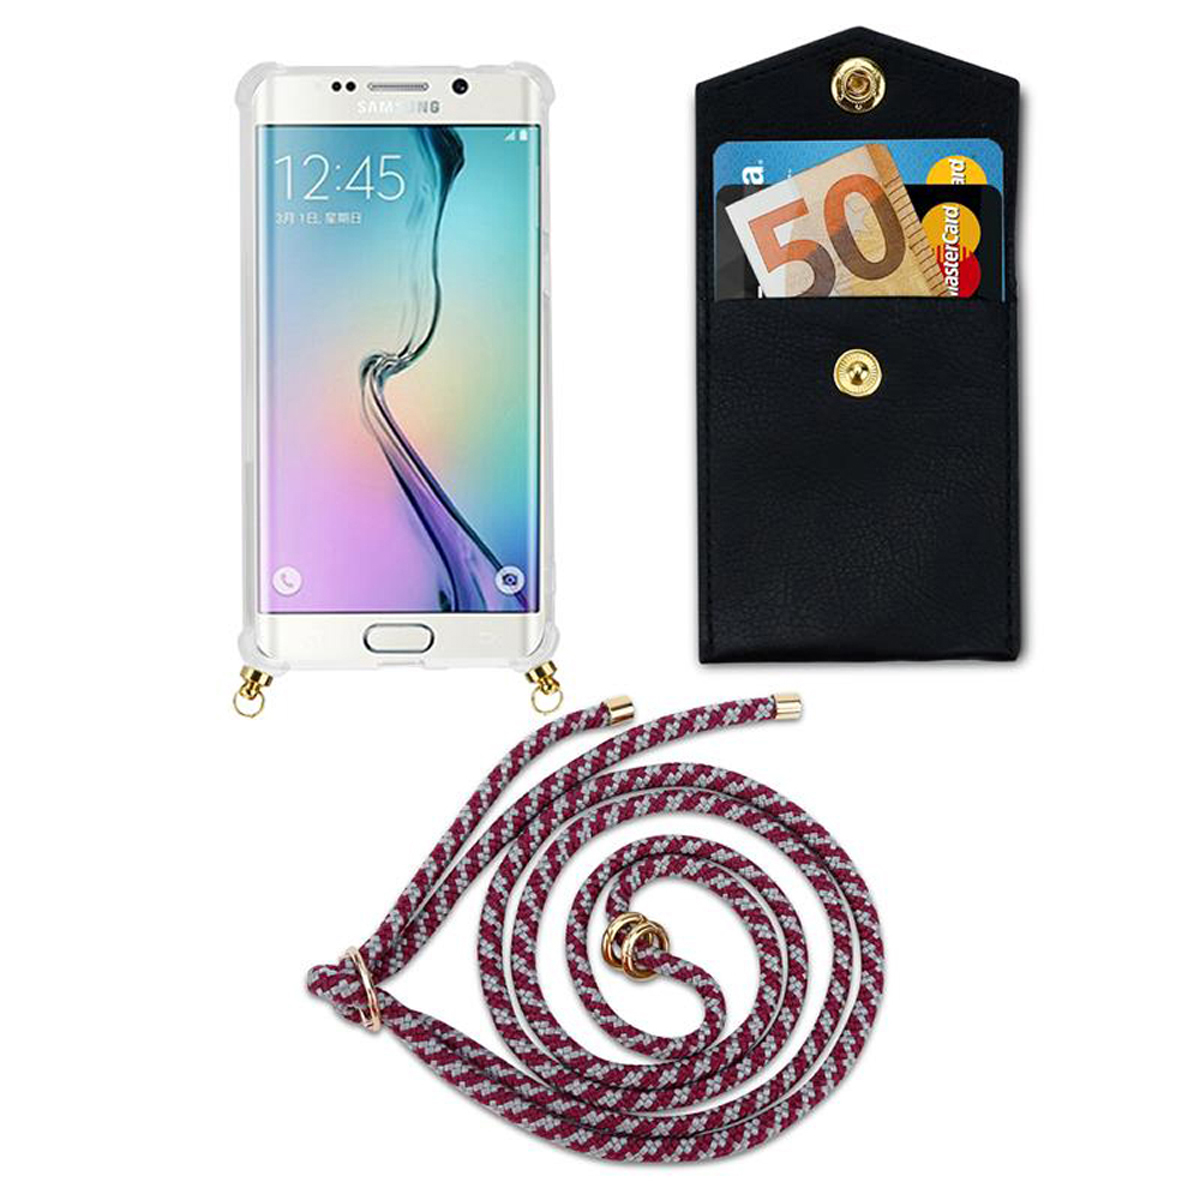 Backcover, ROT S6, Ringen, Band Gold Galaxy Samsung, Handy Kordel Kette WEIß und Hülle, mit CADORABO abnehmbarer